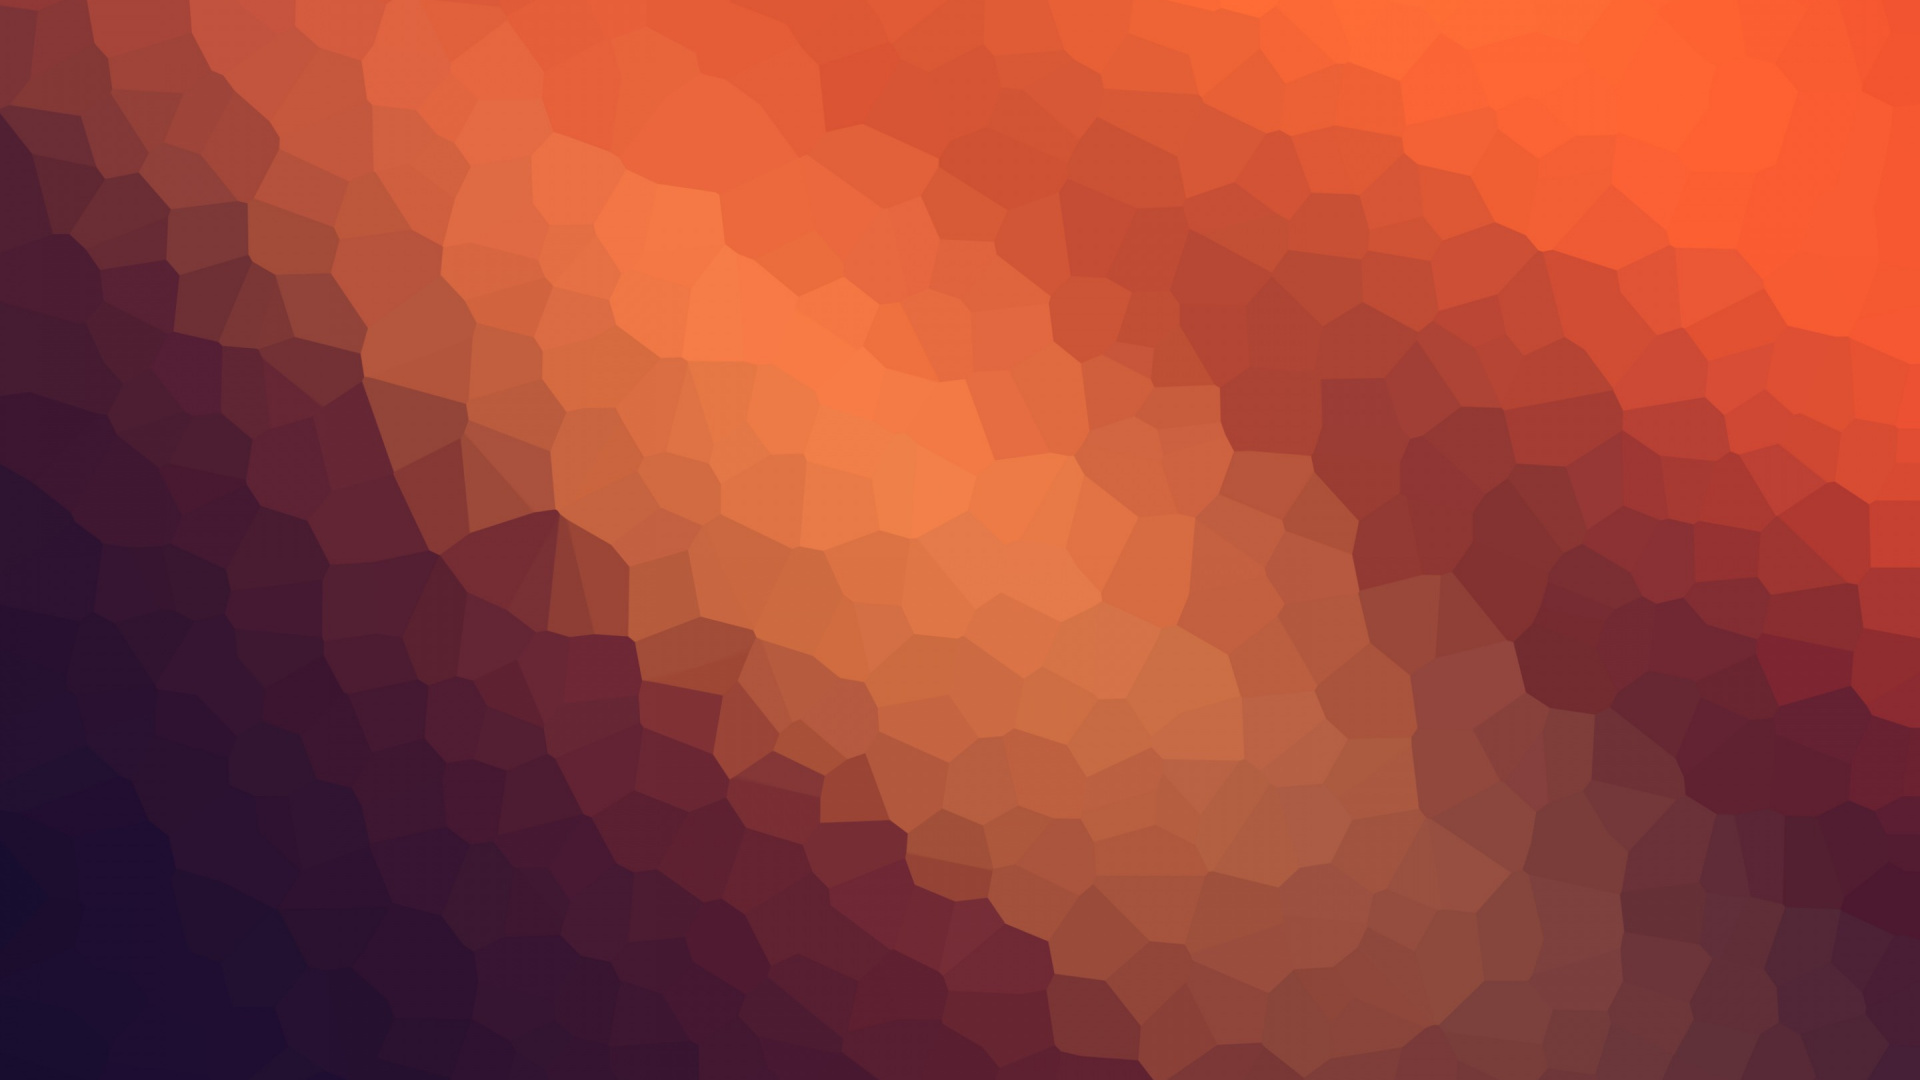 Orange and Black Abstract Painting. Wallpaper in 1920x1080 Resolution